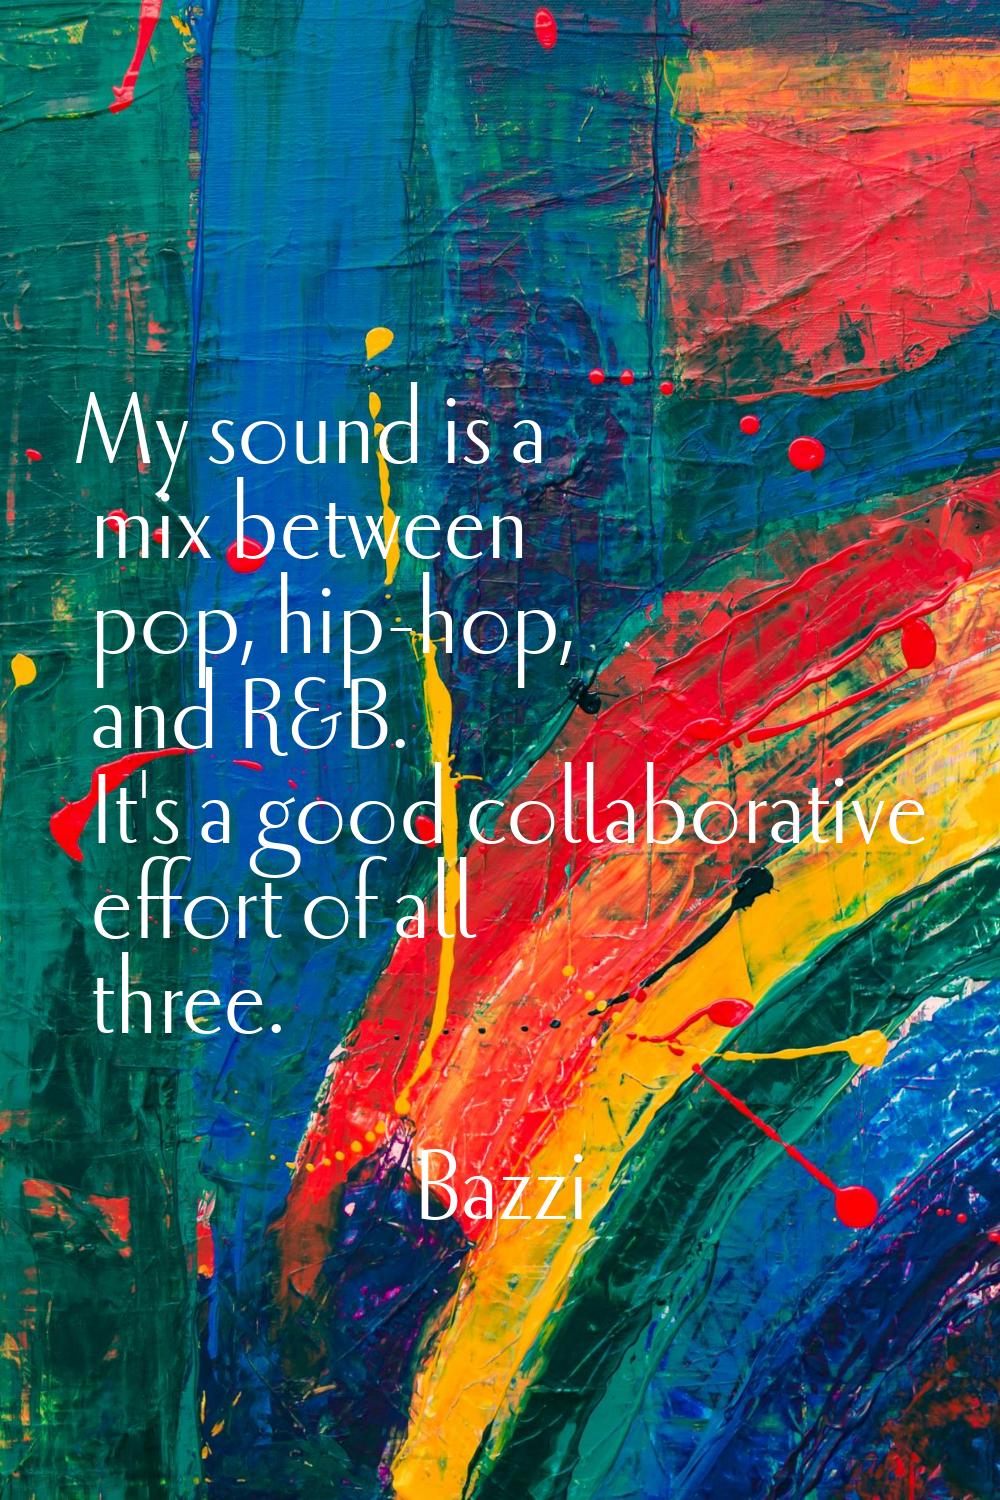 My sound is a mix between pop, hip-hop, and R&B. It's a good collaborative effort of all three.